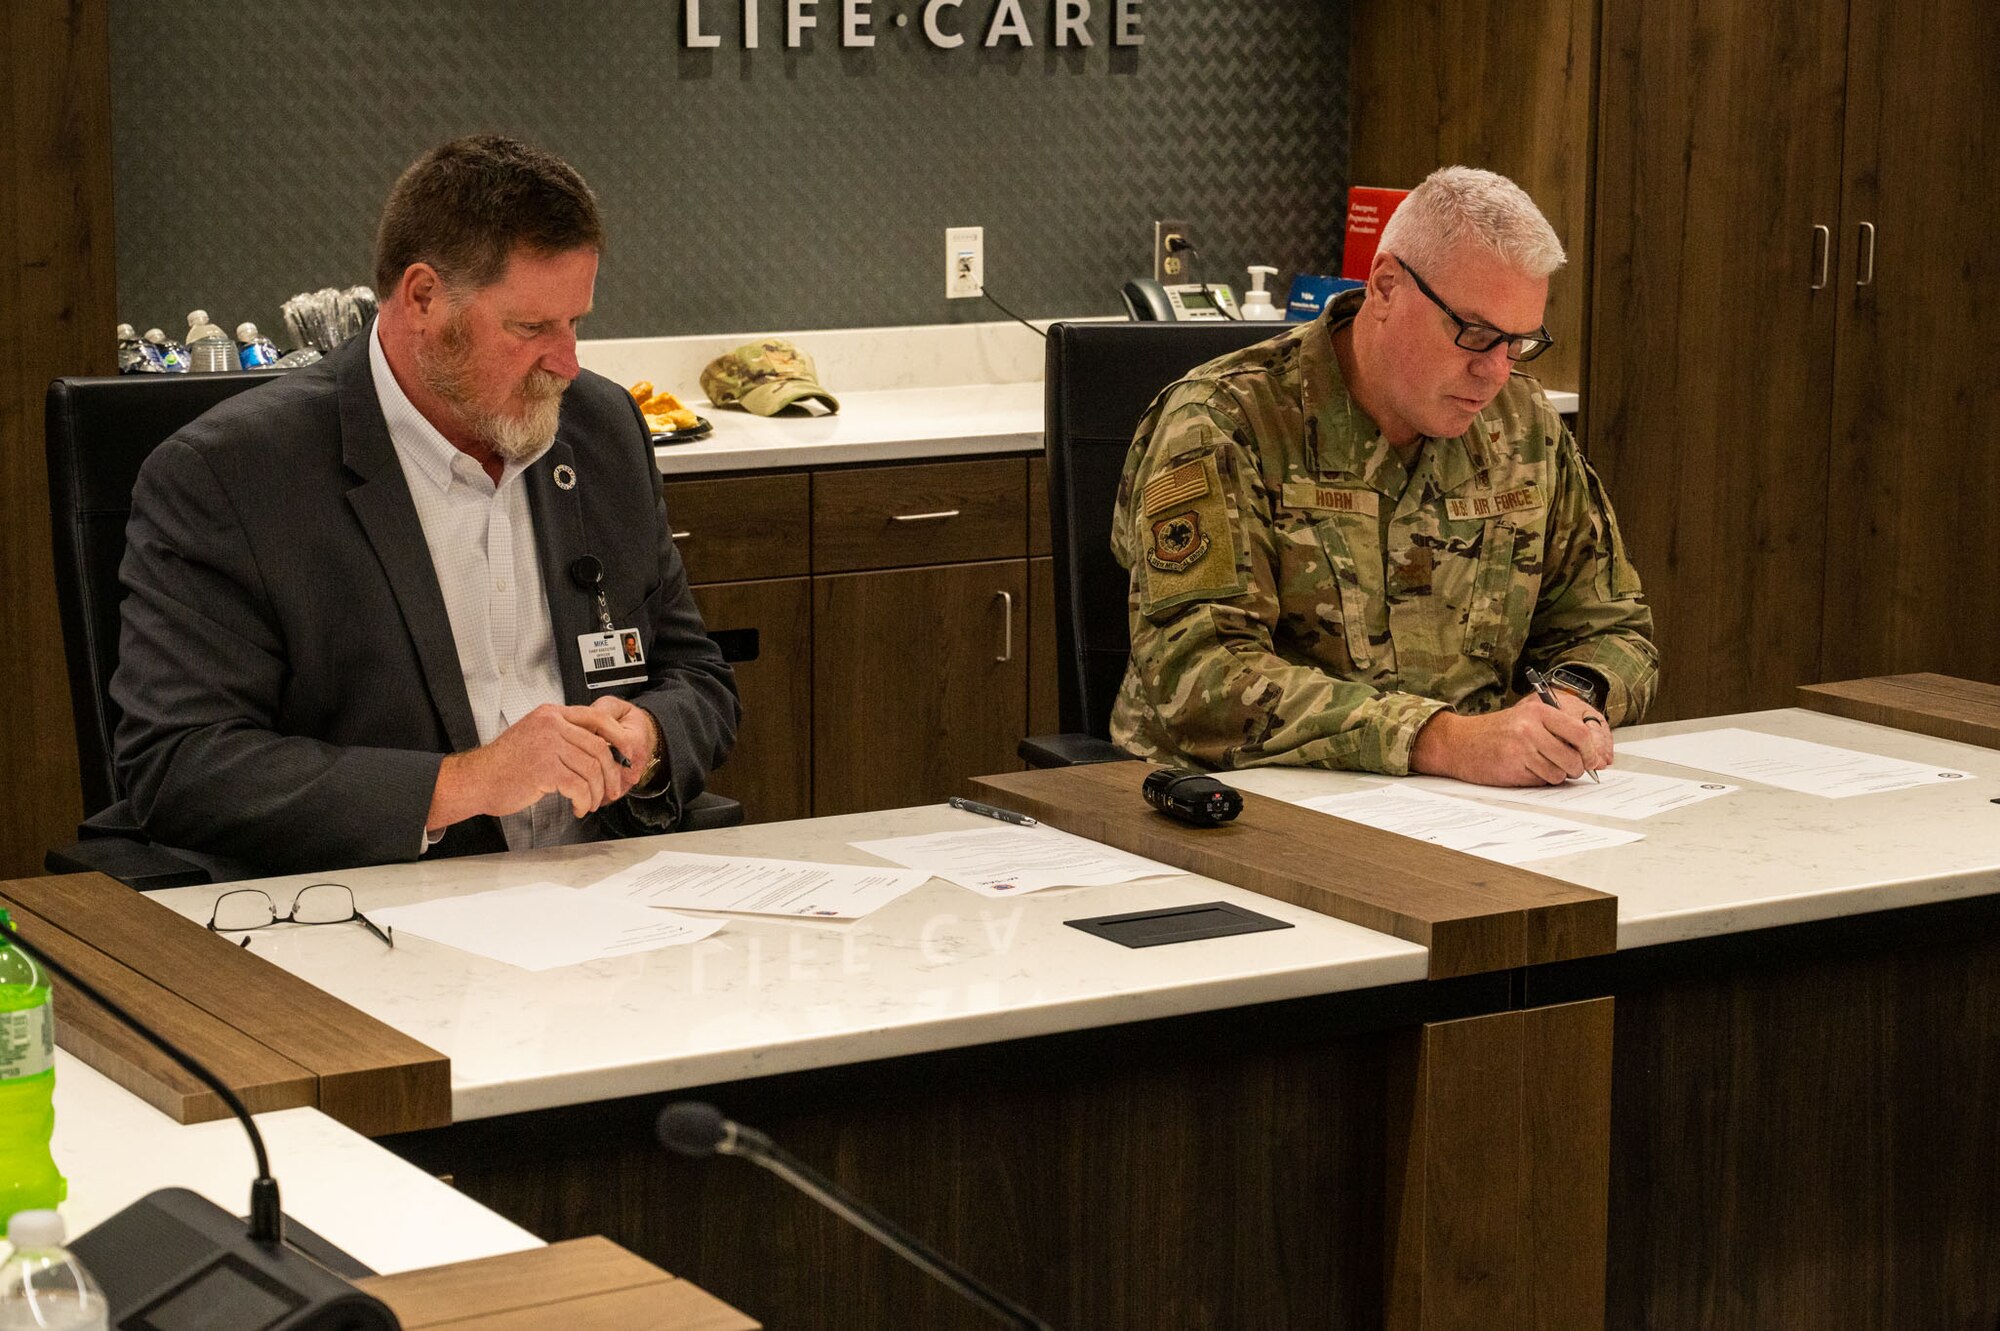 The 139th Airlift Wing and Mosaic Life Care signed a training agreement at Mosaic Life Care, St. Joseph, Missouri, October 2, 2023. The agreement will provide the wing’s medical Airmen with another opportunity to maintain their clinical requirements as medics. (U.S. Air National Guard photo by Senior Airman Janae Masoner)